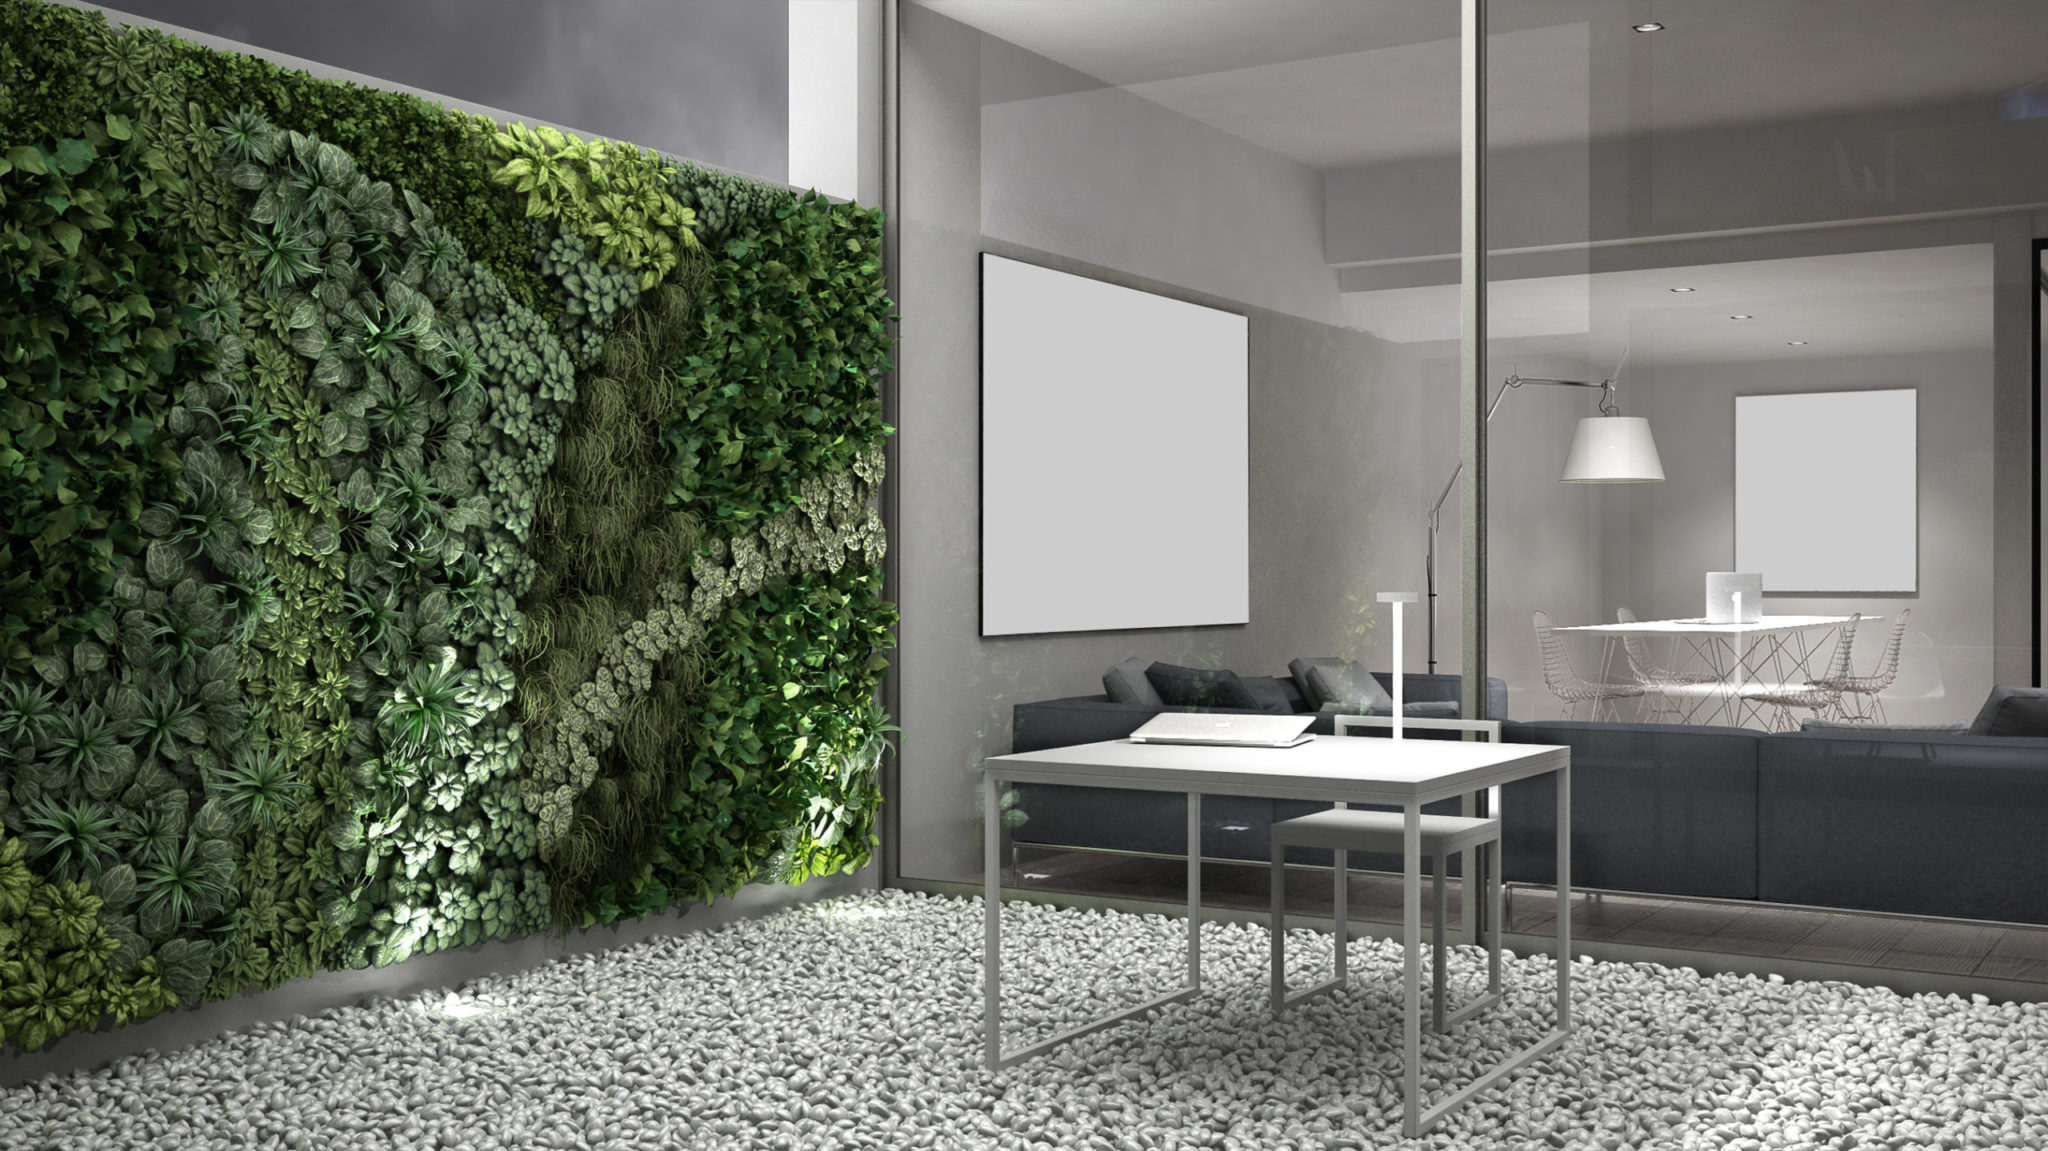 Living wall from Broward Landscape